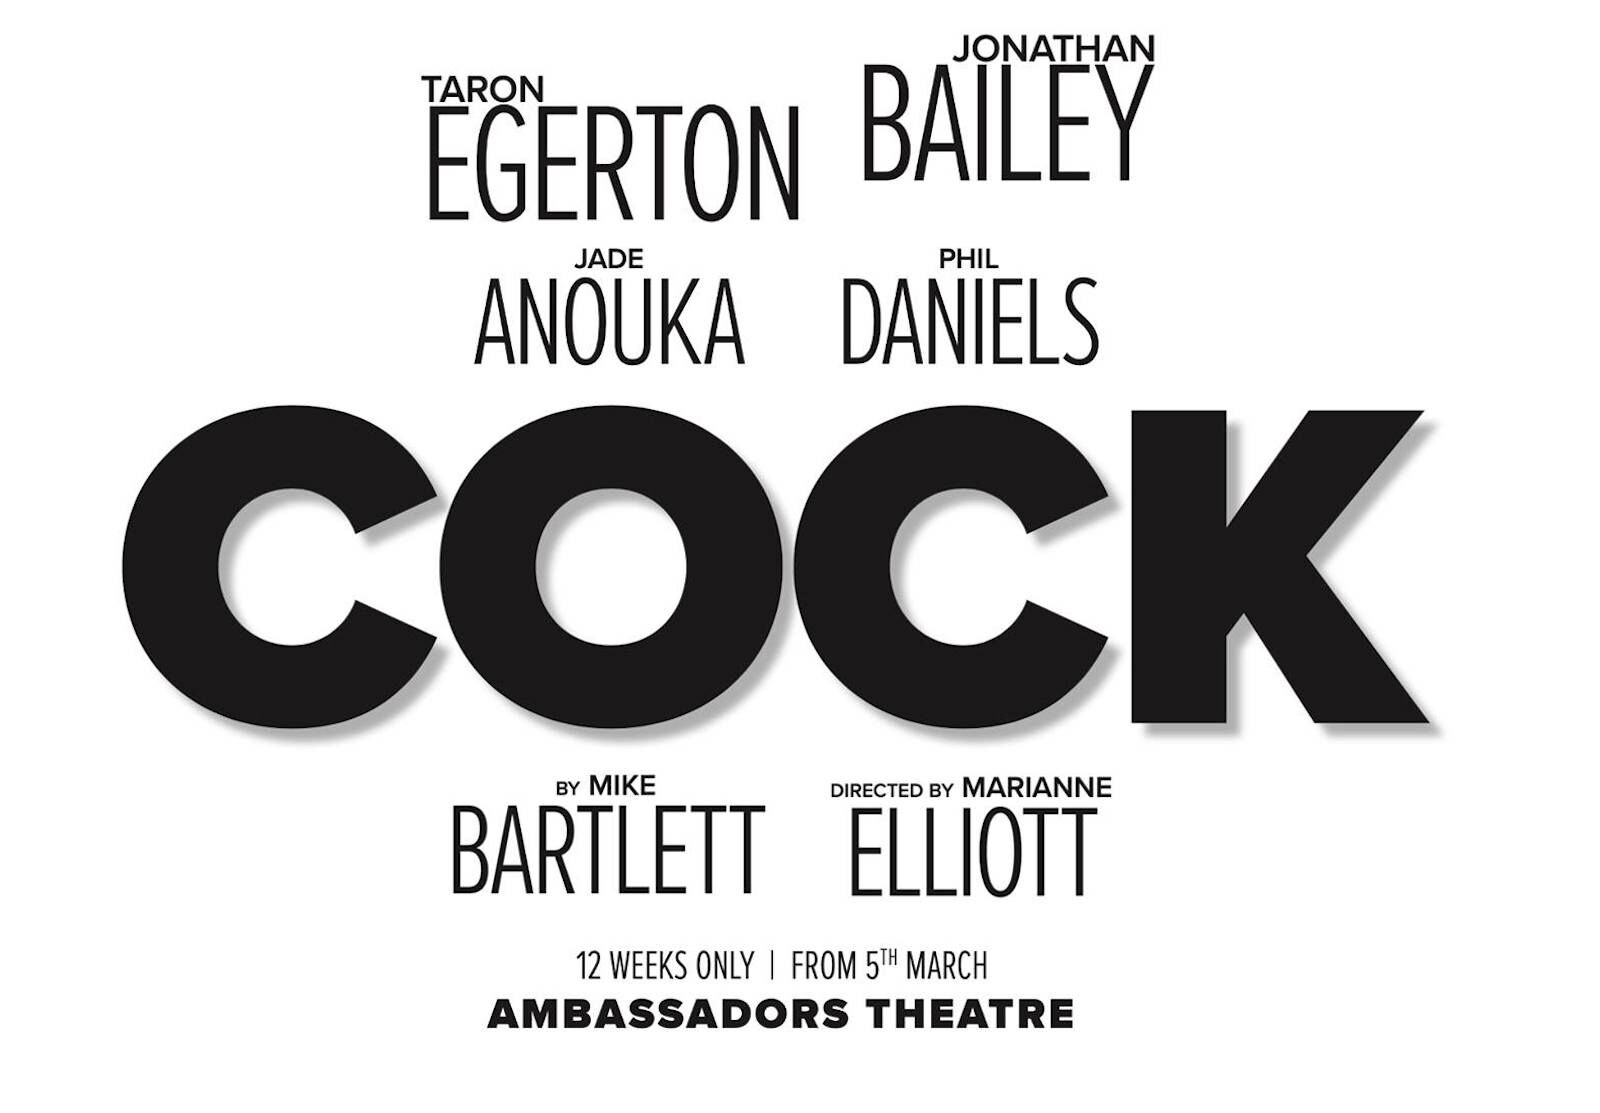 Poster for "Cock", one of the best London shows in 2022